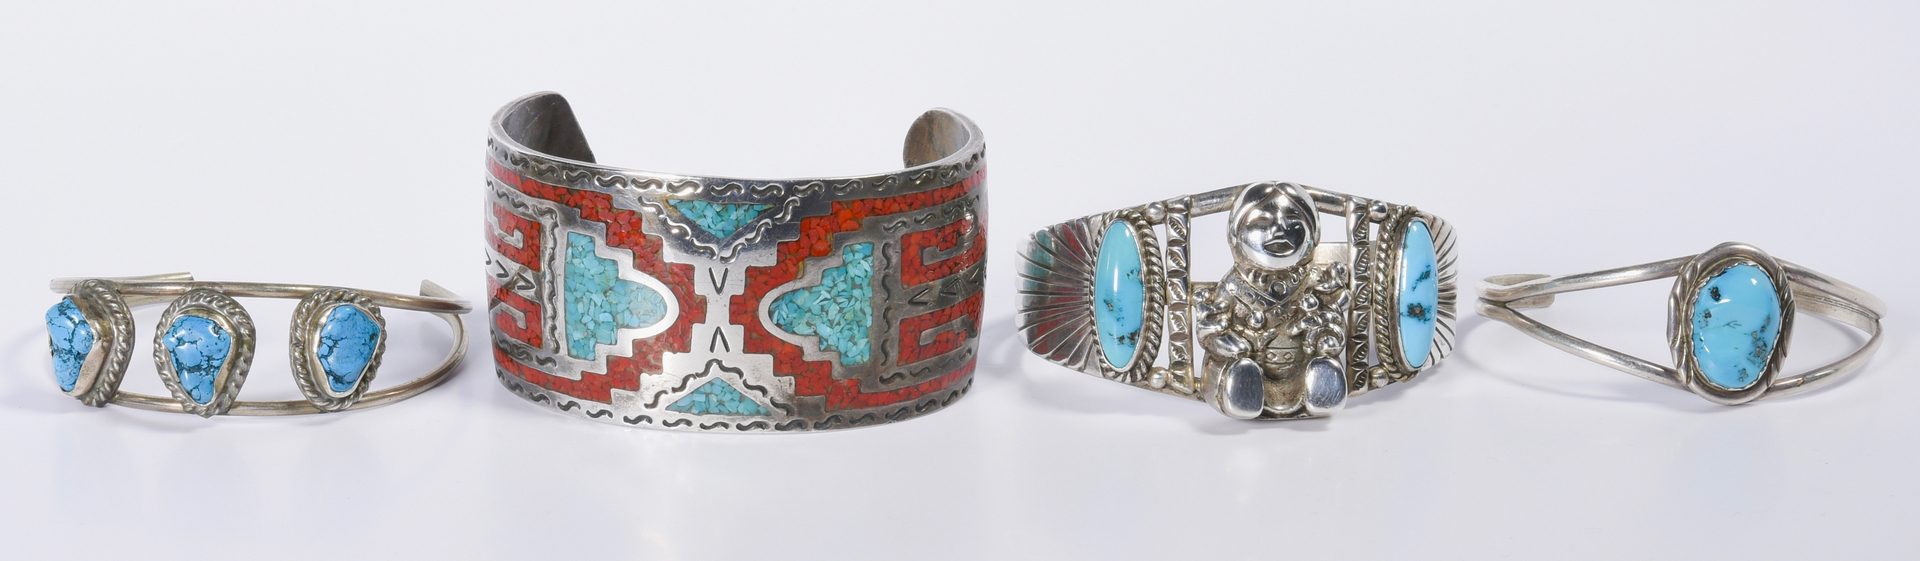 Lot 616: Native American Jewelry Grouping, 9 items